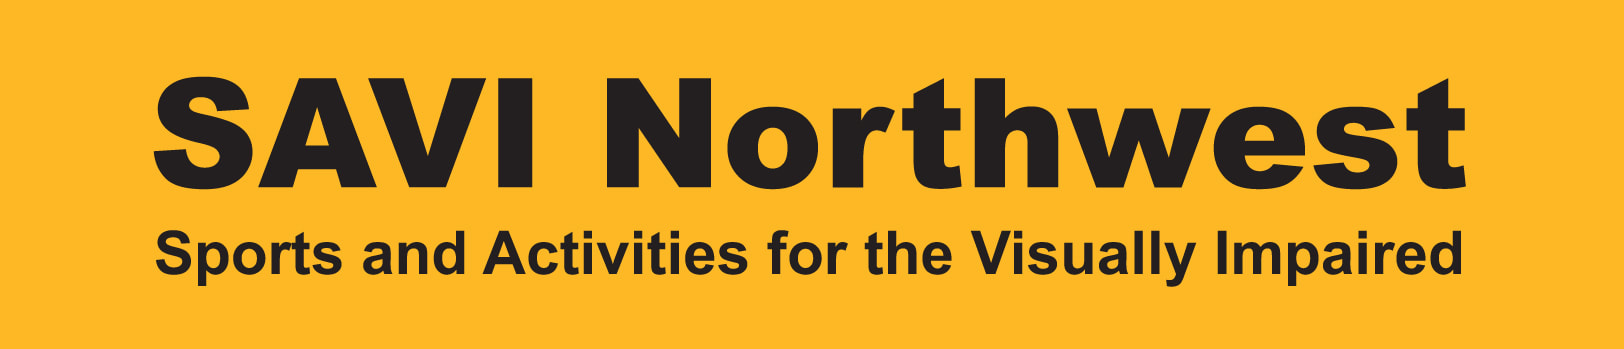 SAVI Northwest logo, yellow rectangle with large black text reads SAVI Northwest Sports and Activities for the Visually Impaired